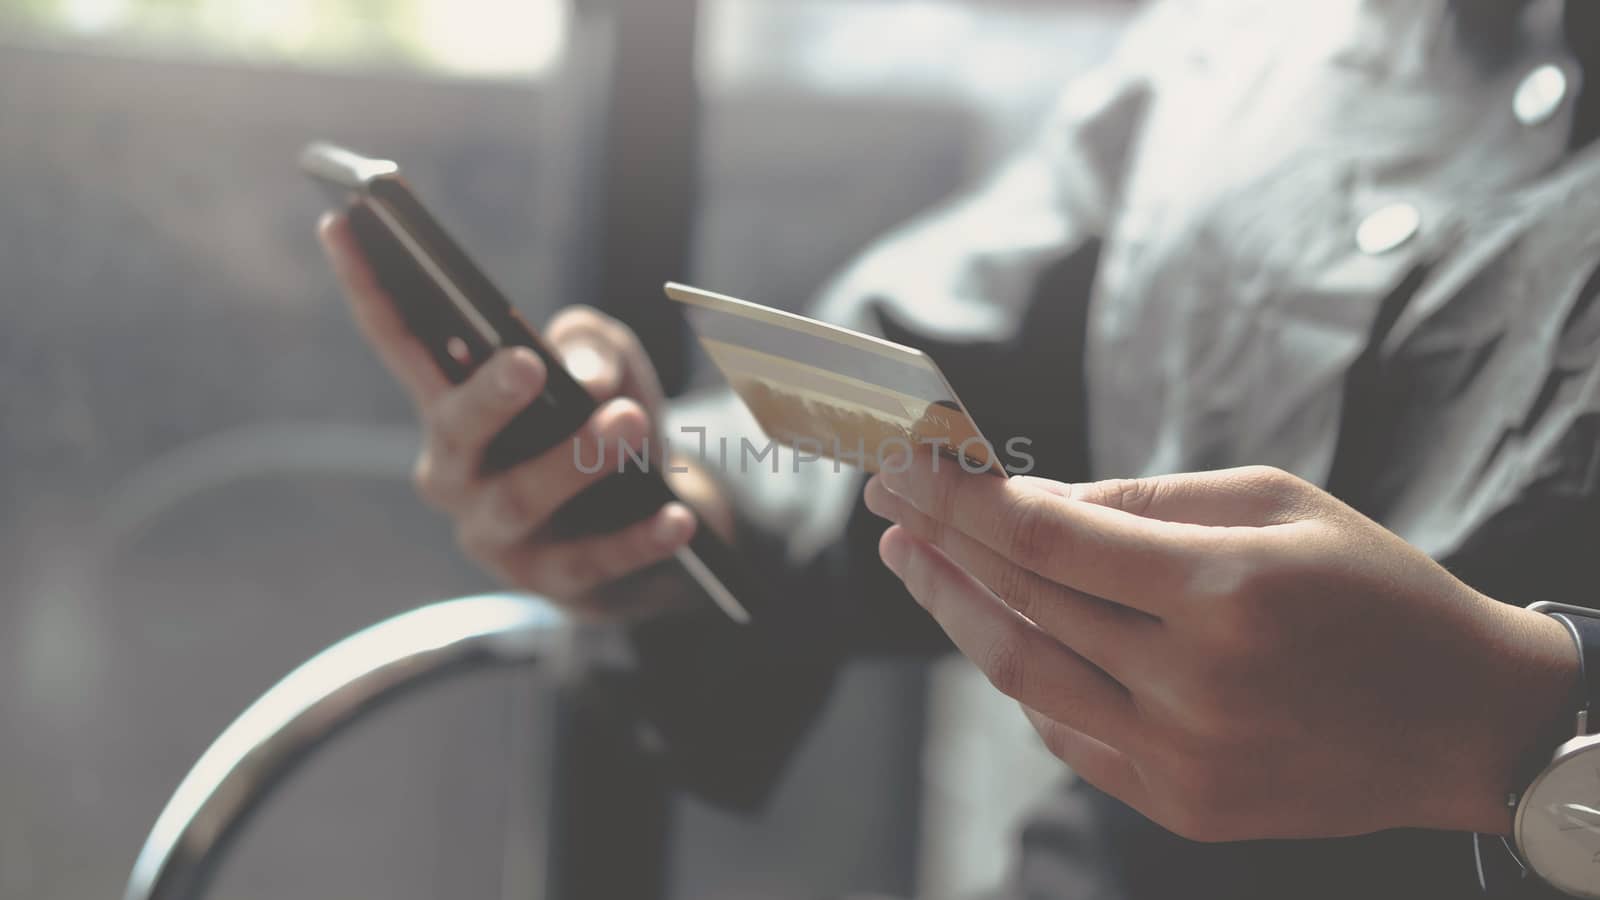 Online payment,woman's hands holding a credit card and using smartphone for online shopping.